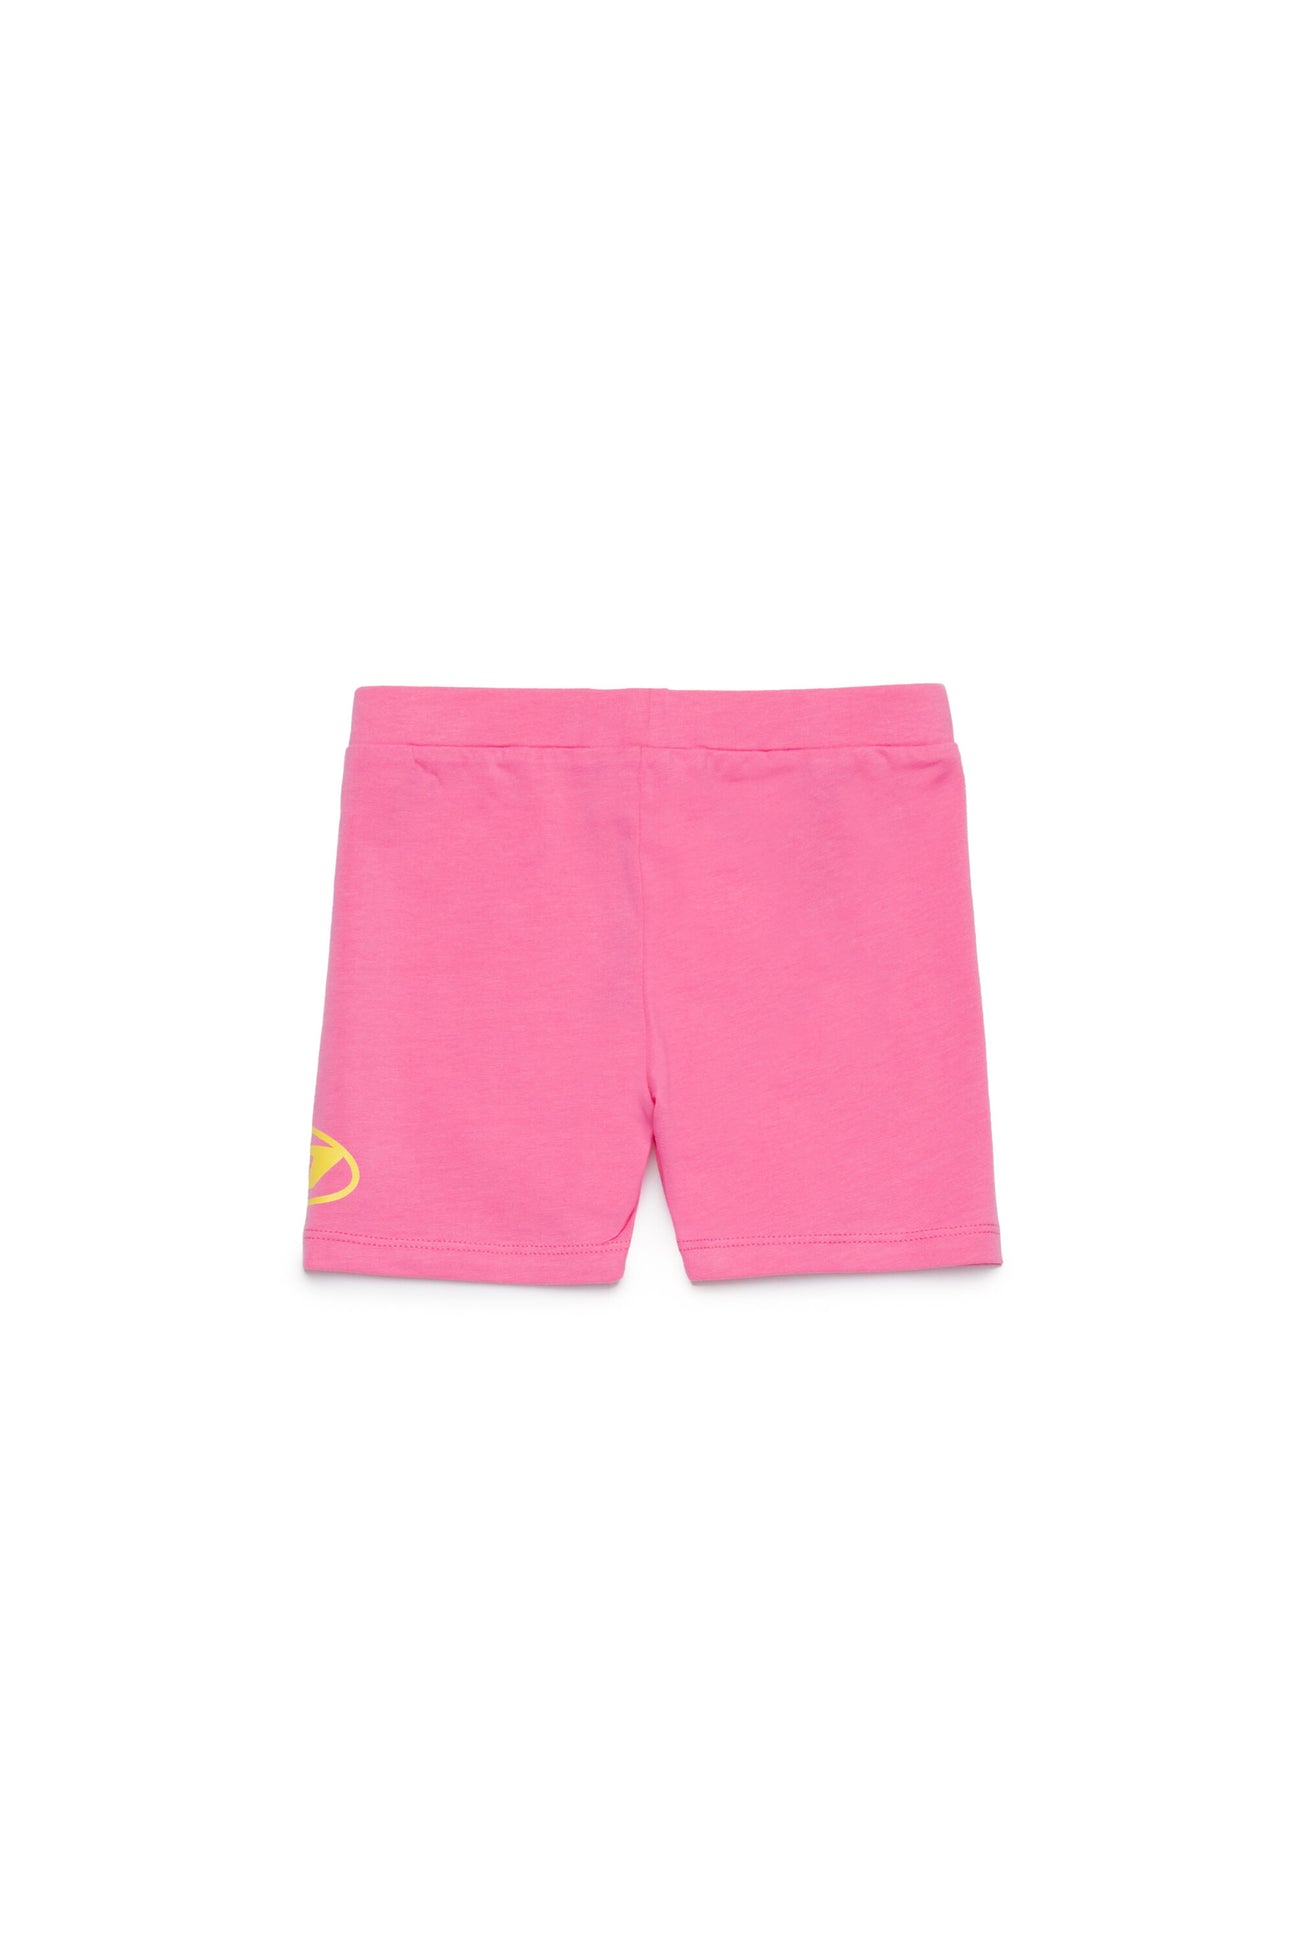 Cotton shorts with Oval D logo Cotton shorts with Oval D logo